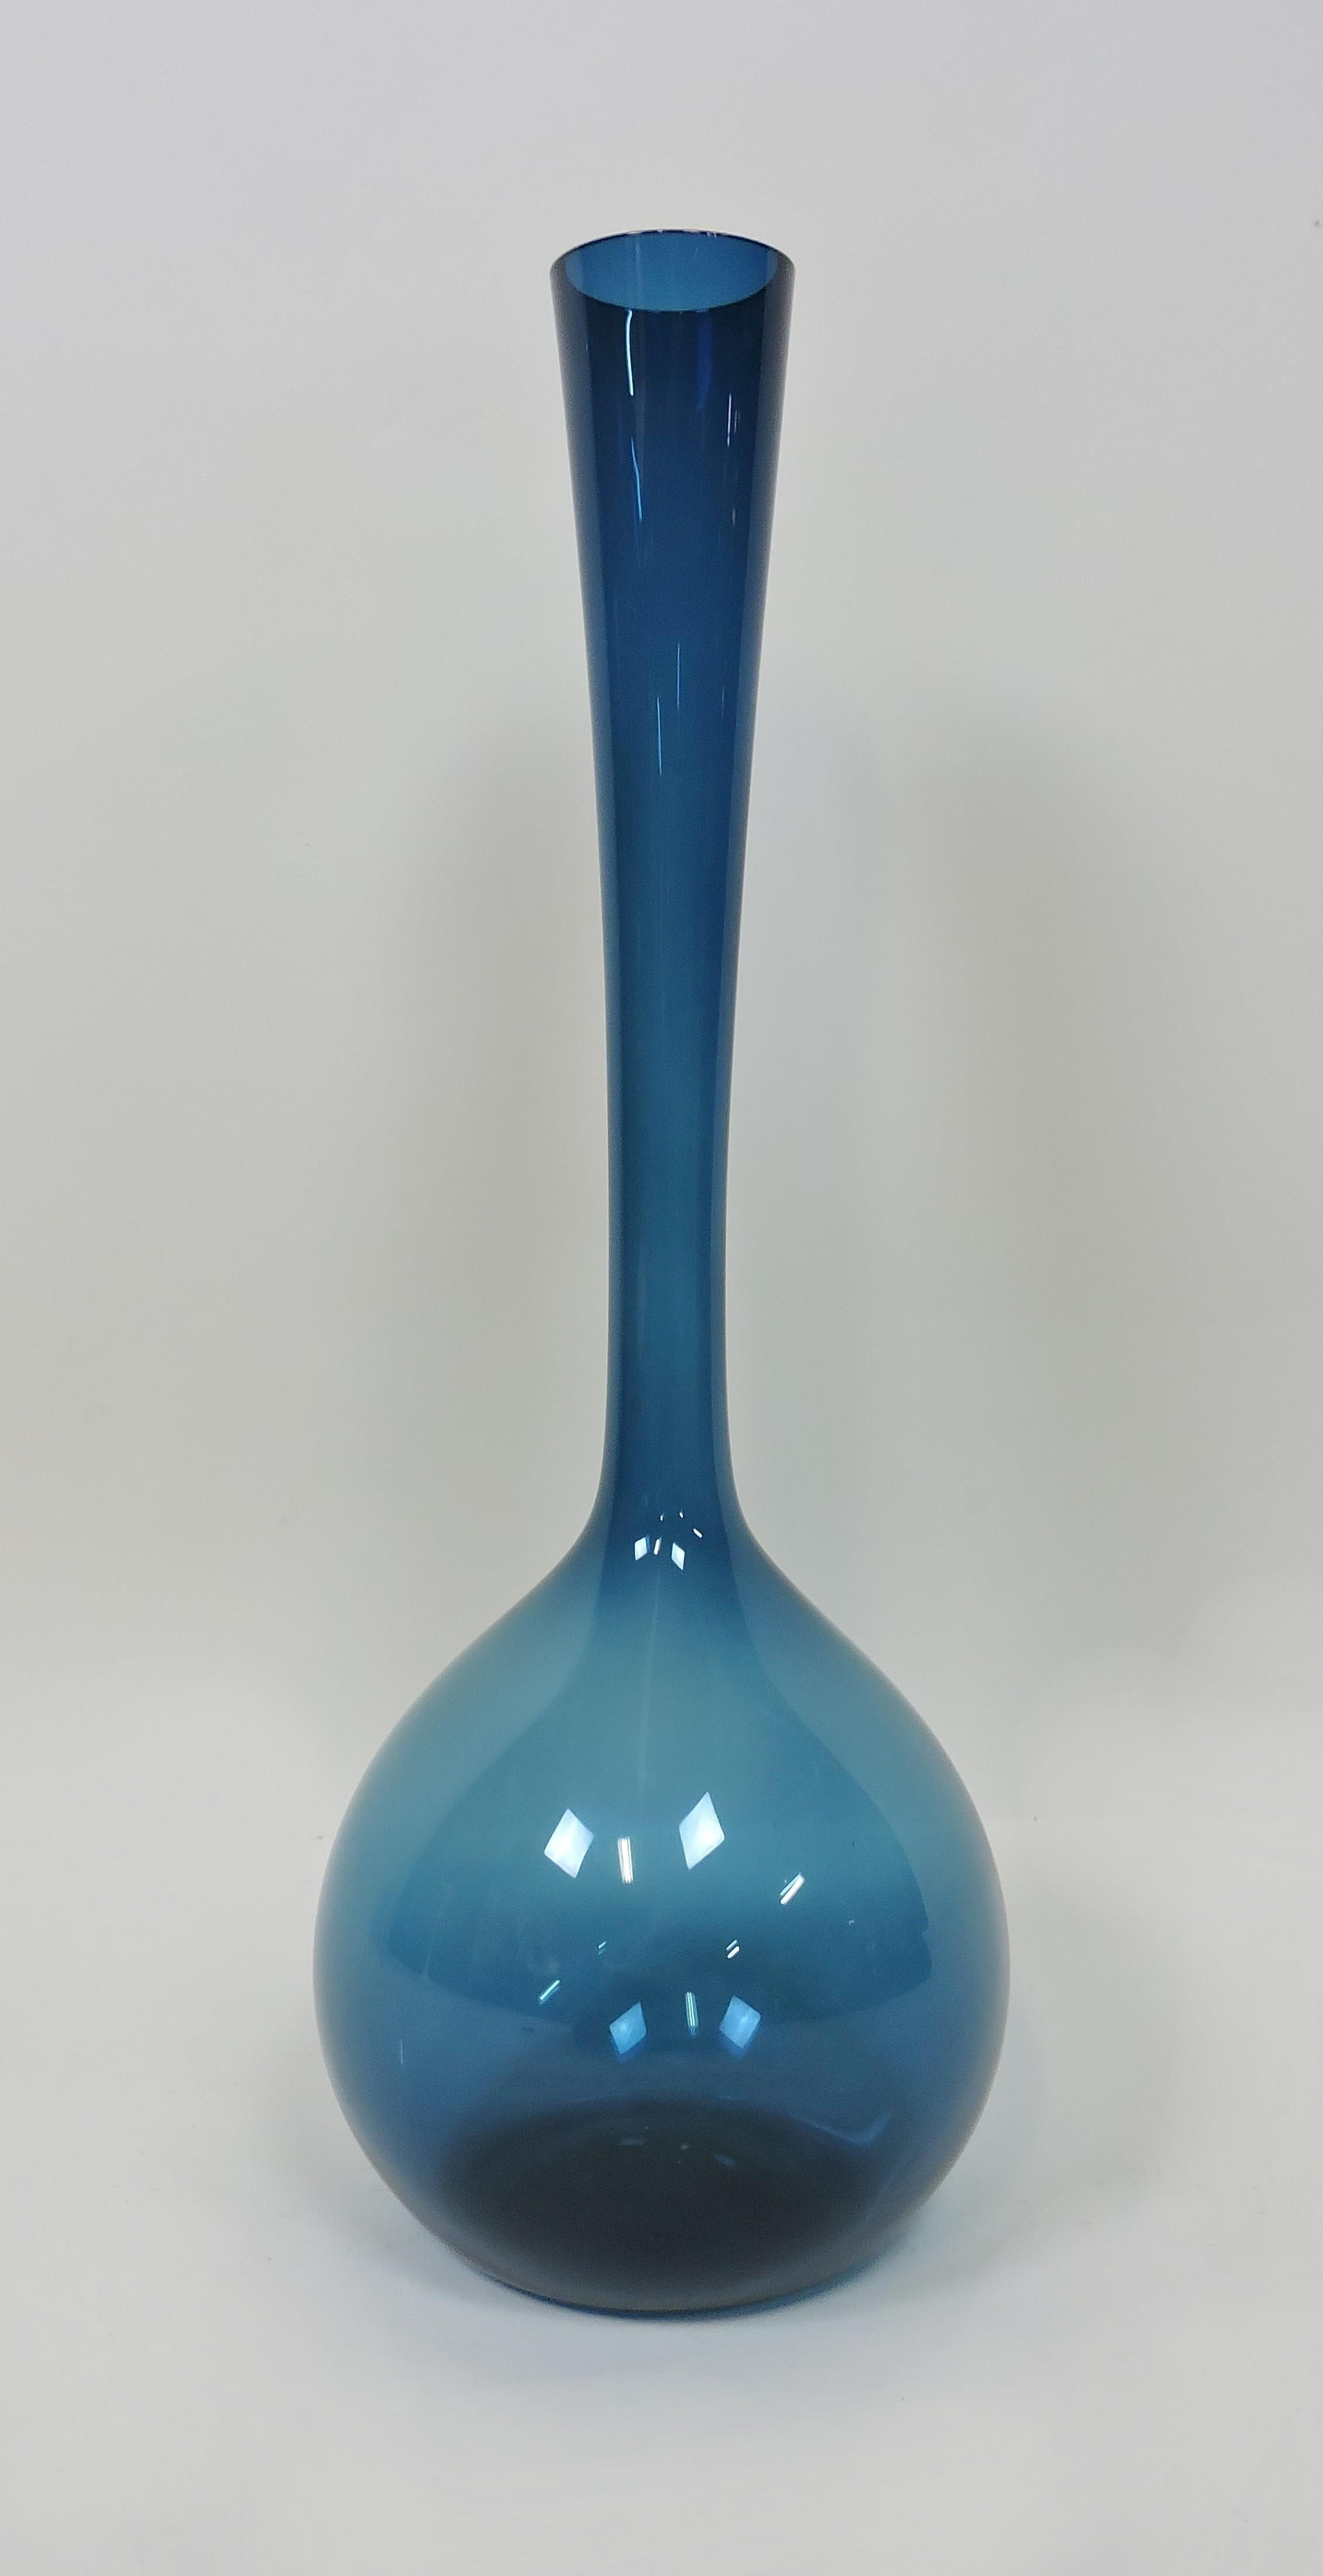 Large and impressive hand blown bulb vase by Arthur Percy and made in Sweden by Gullaskruf. This vase is almost 20